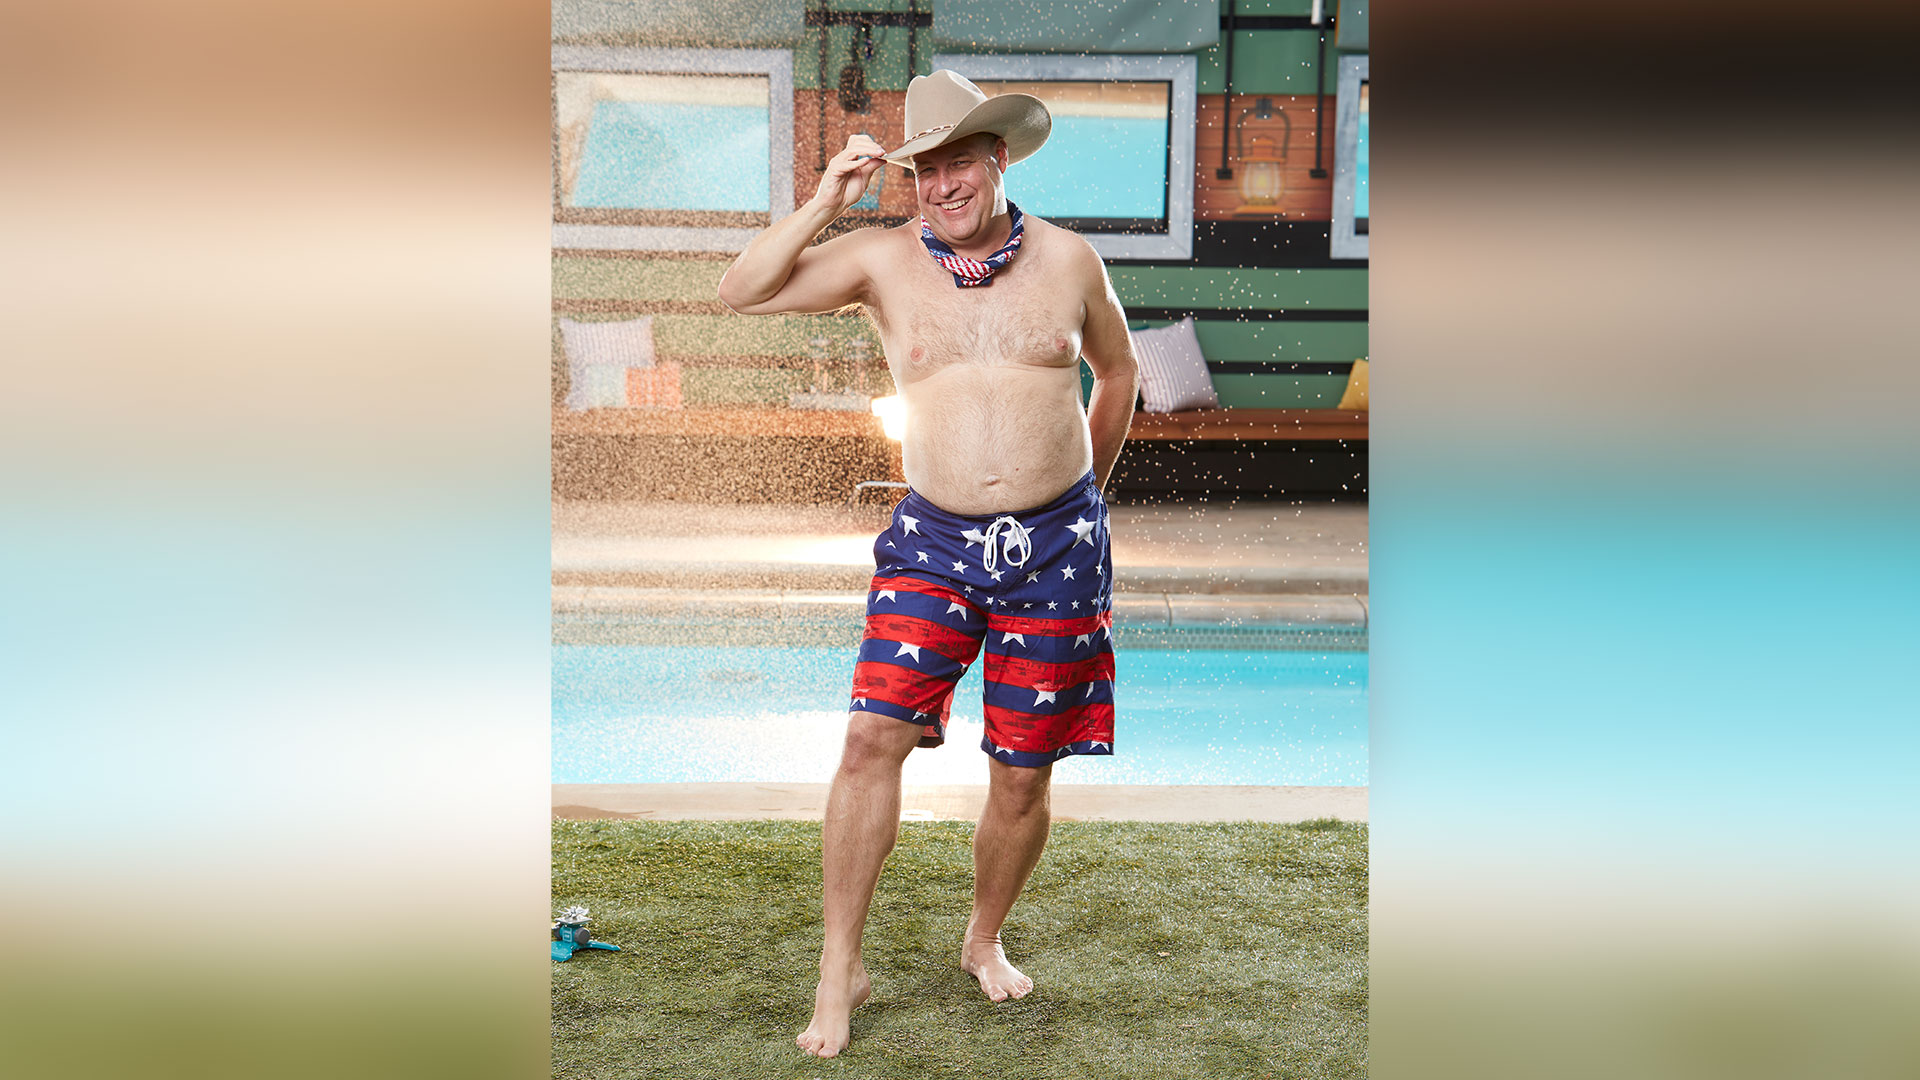 Cliff Hogg III shows us how the Texans lounge poolside with a cowboy hat and plenty of stars and stripes.